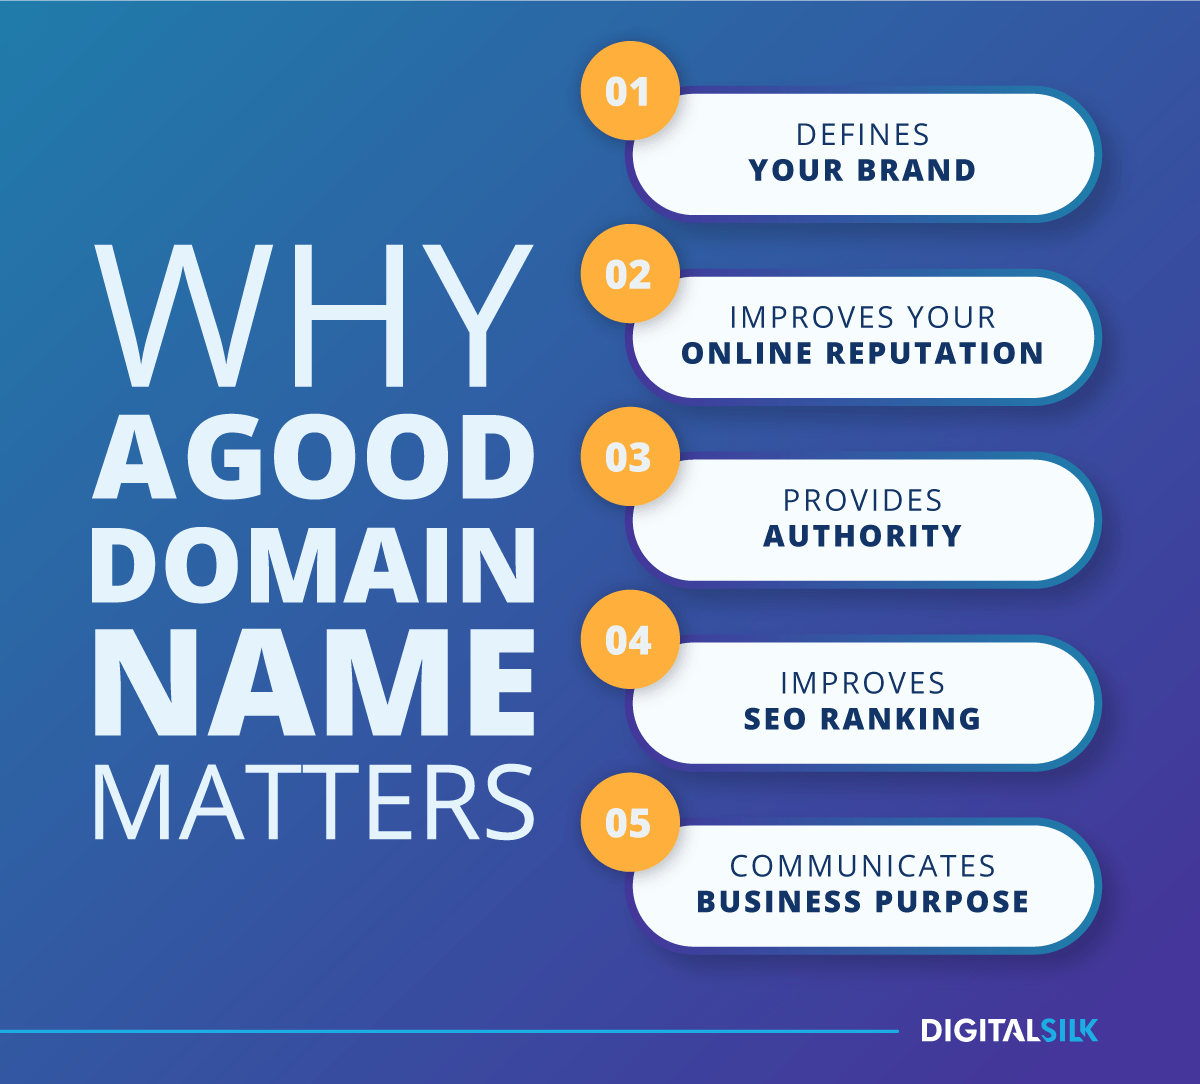 Why good domain name matters